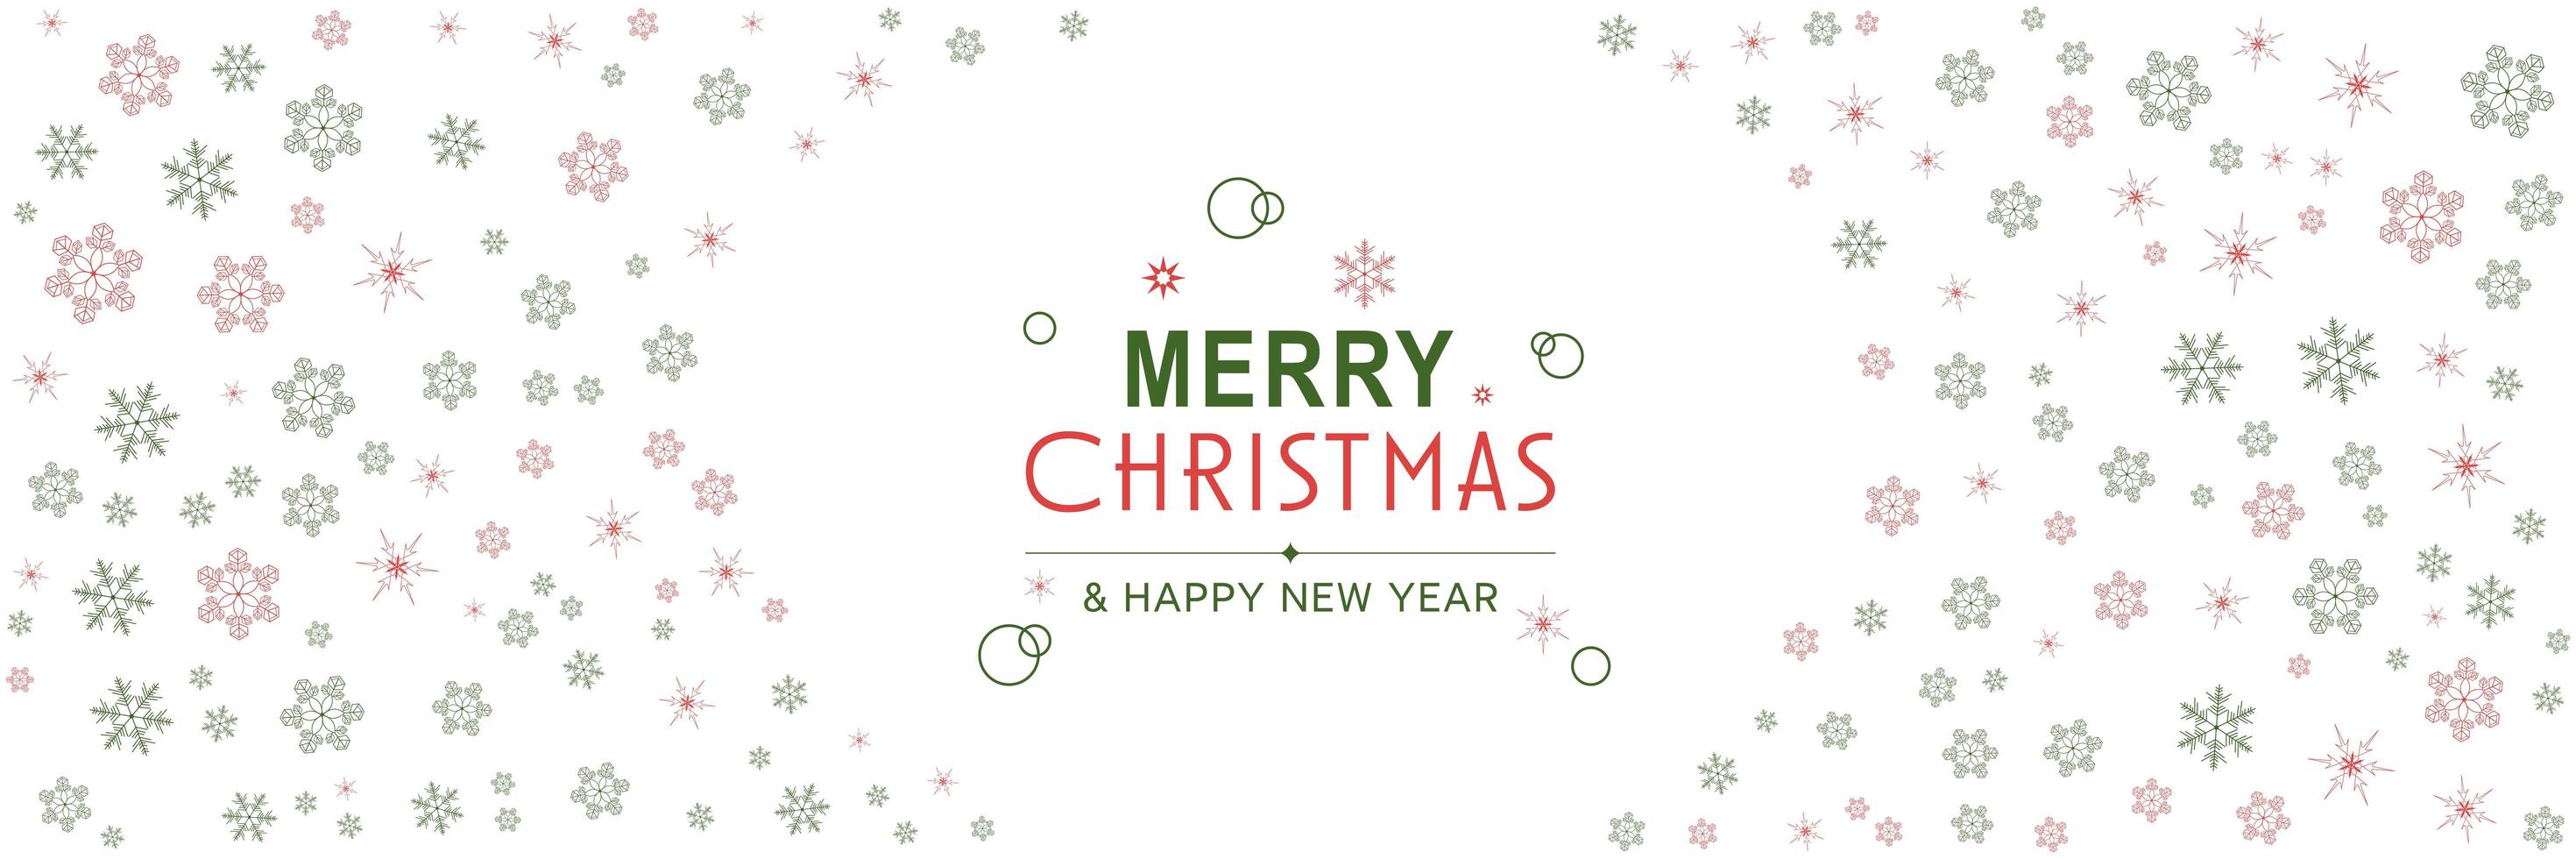 Merry Christmas and New Year 2022 poster. Xmas minimal banner with snowflakes pattern frame and text on white background. Horizontal website header. Vector illustration for greeting card design